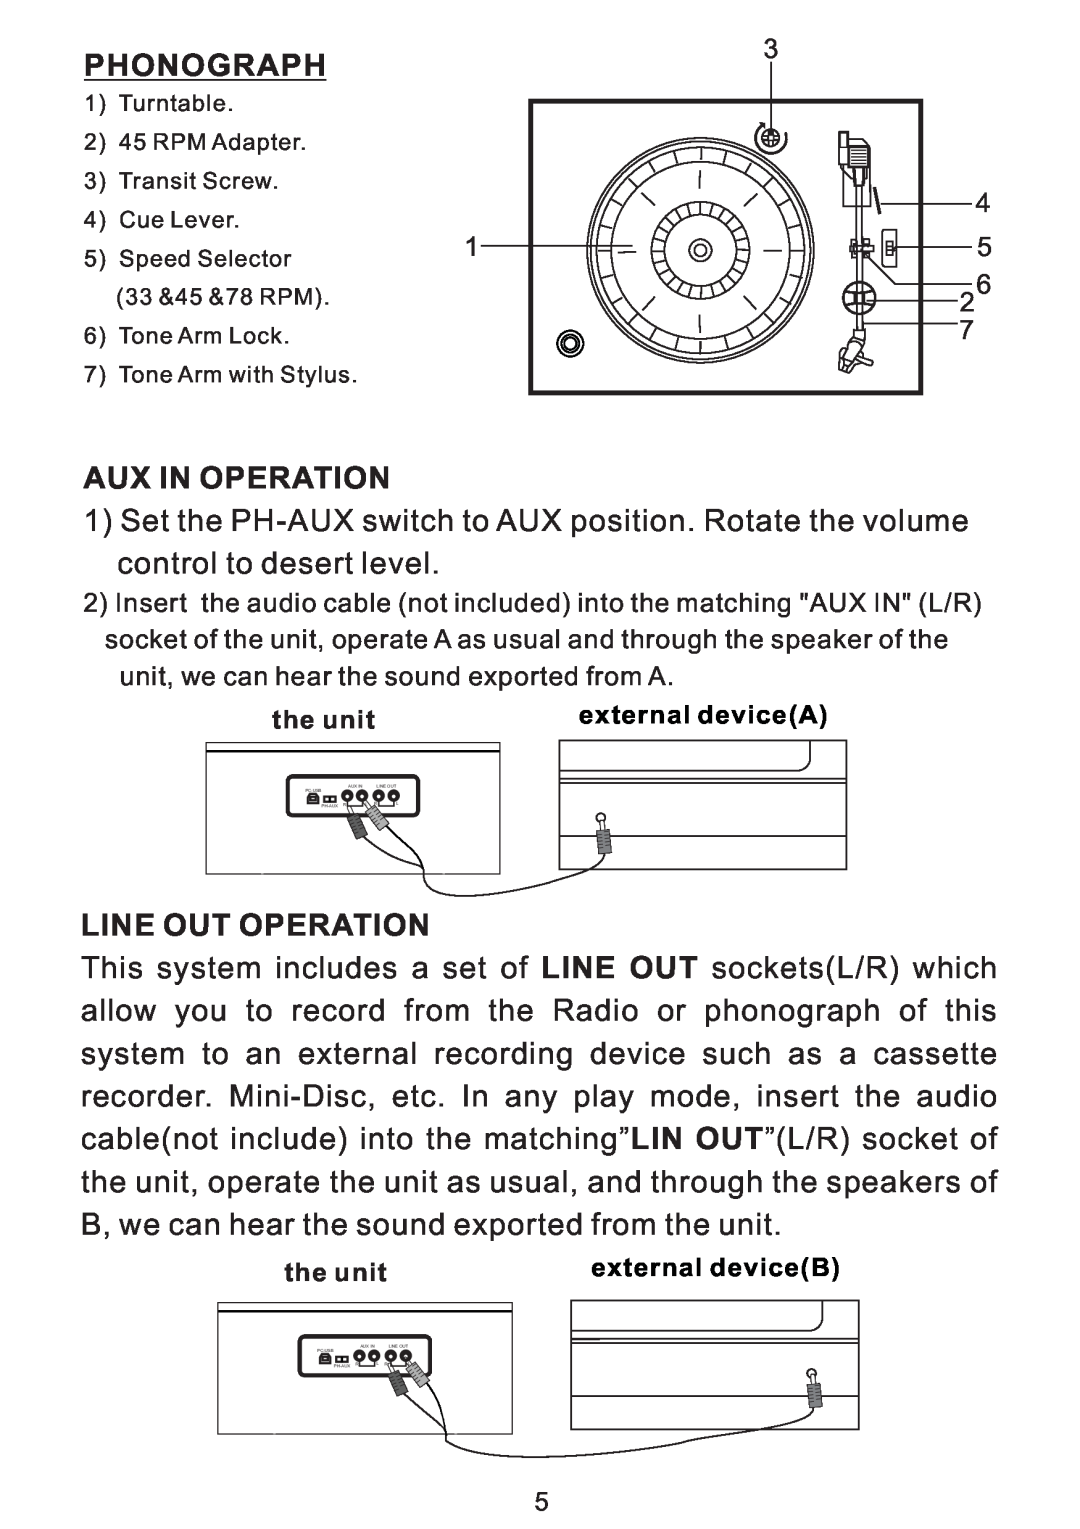 PYLE Audio PVNTT1 manual Phonograph, Aux In Operation, Line Out Operation 